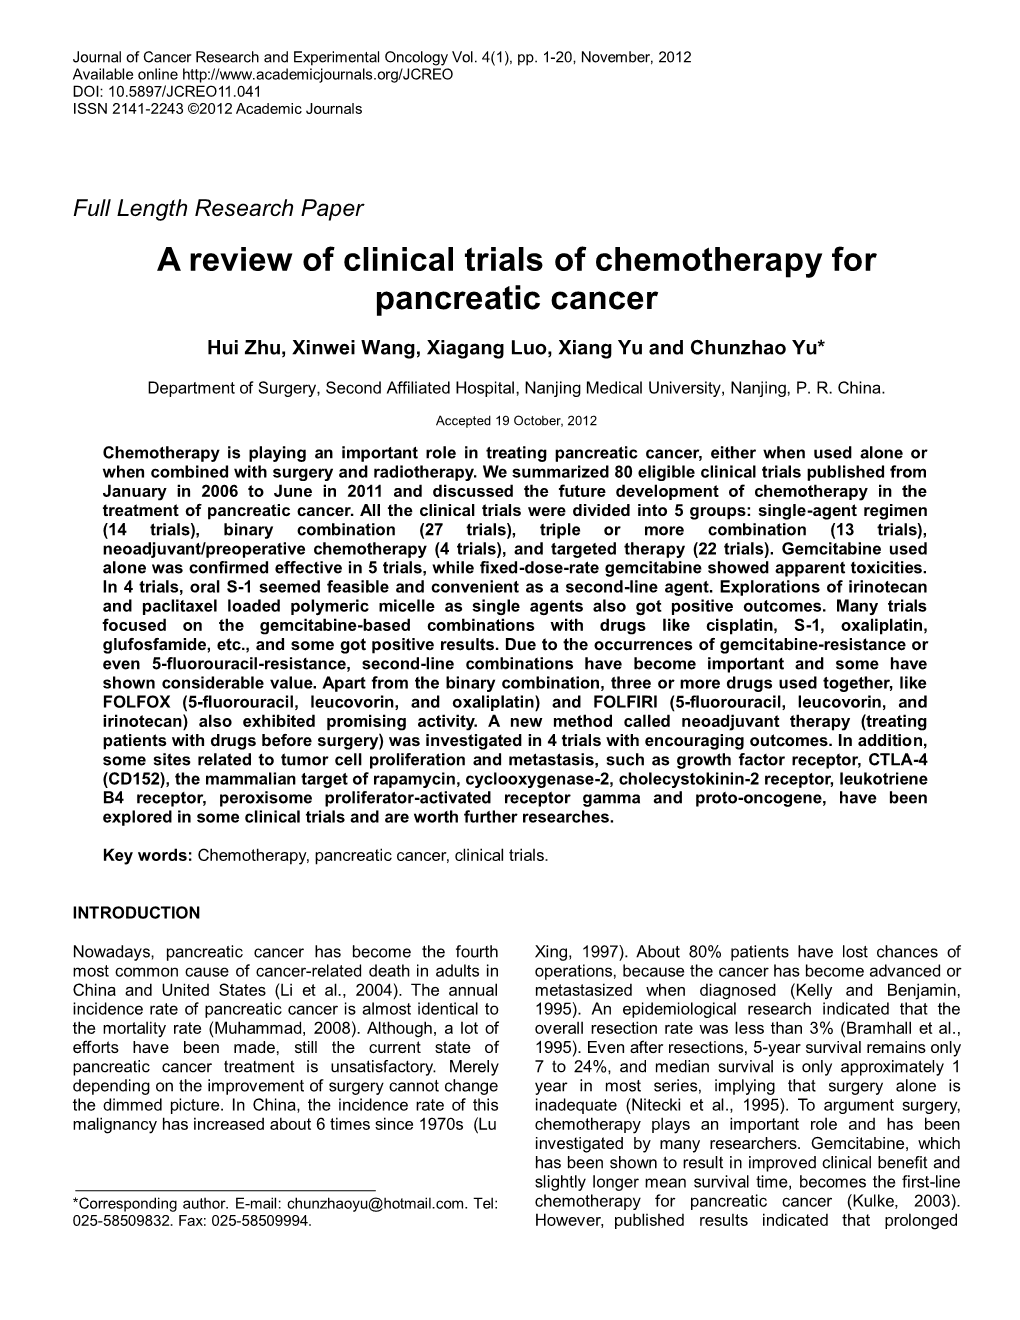 A Review of Clinical Trials of Chemotherapy for Pancreatic Cancer